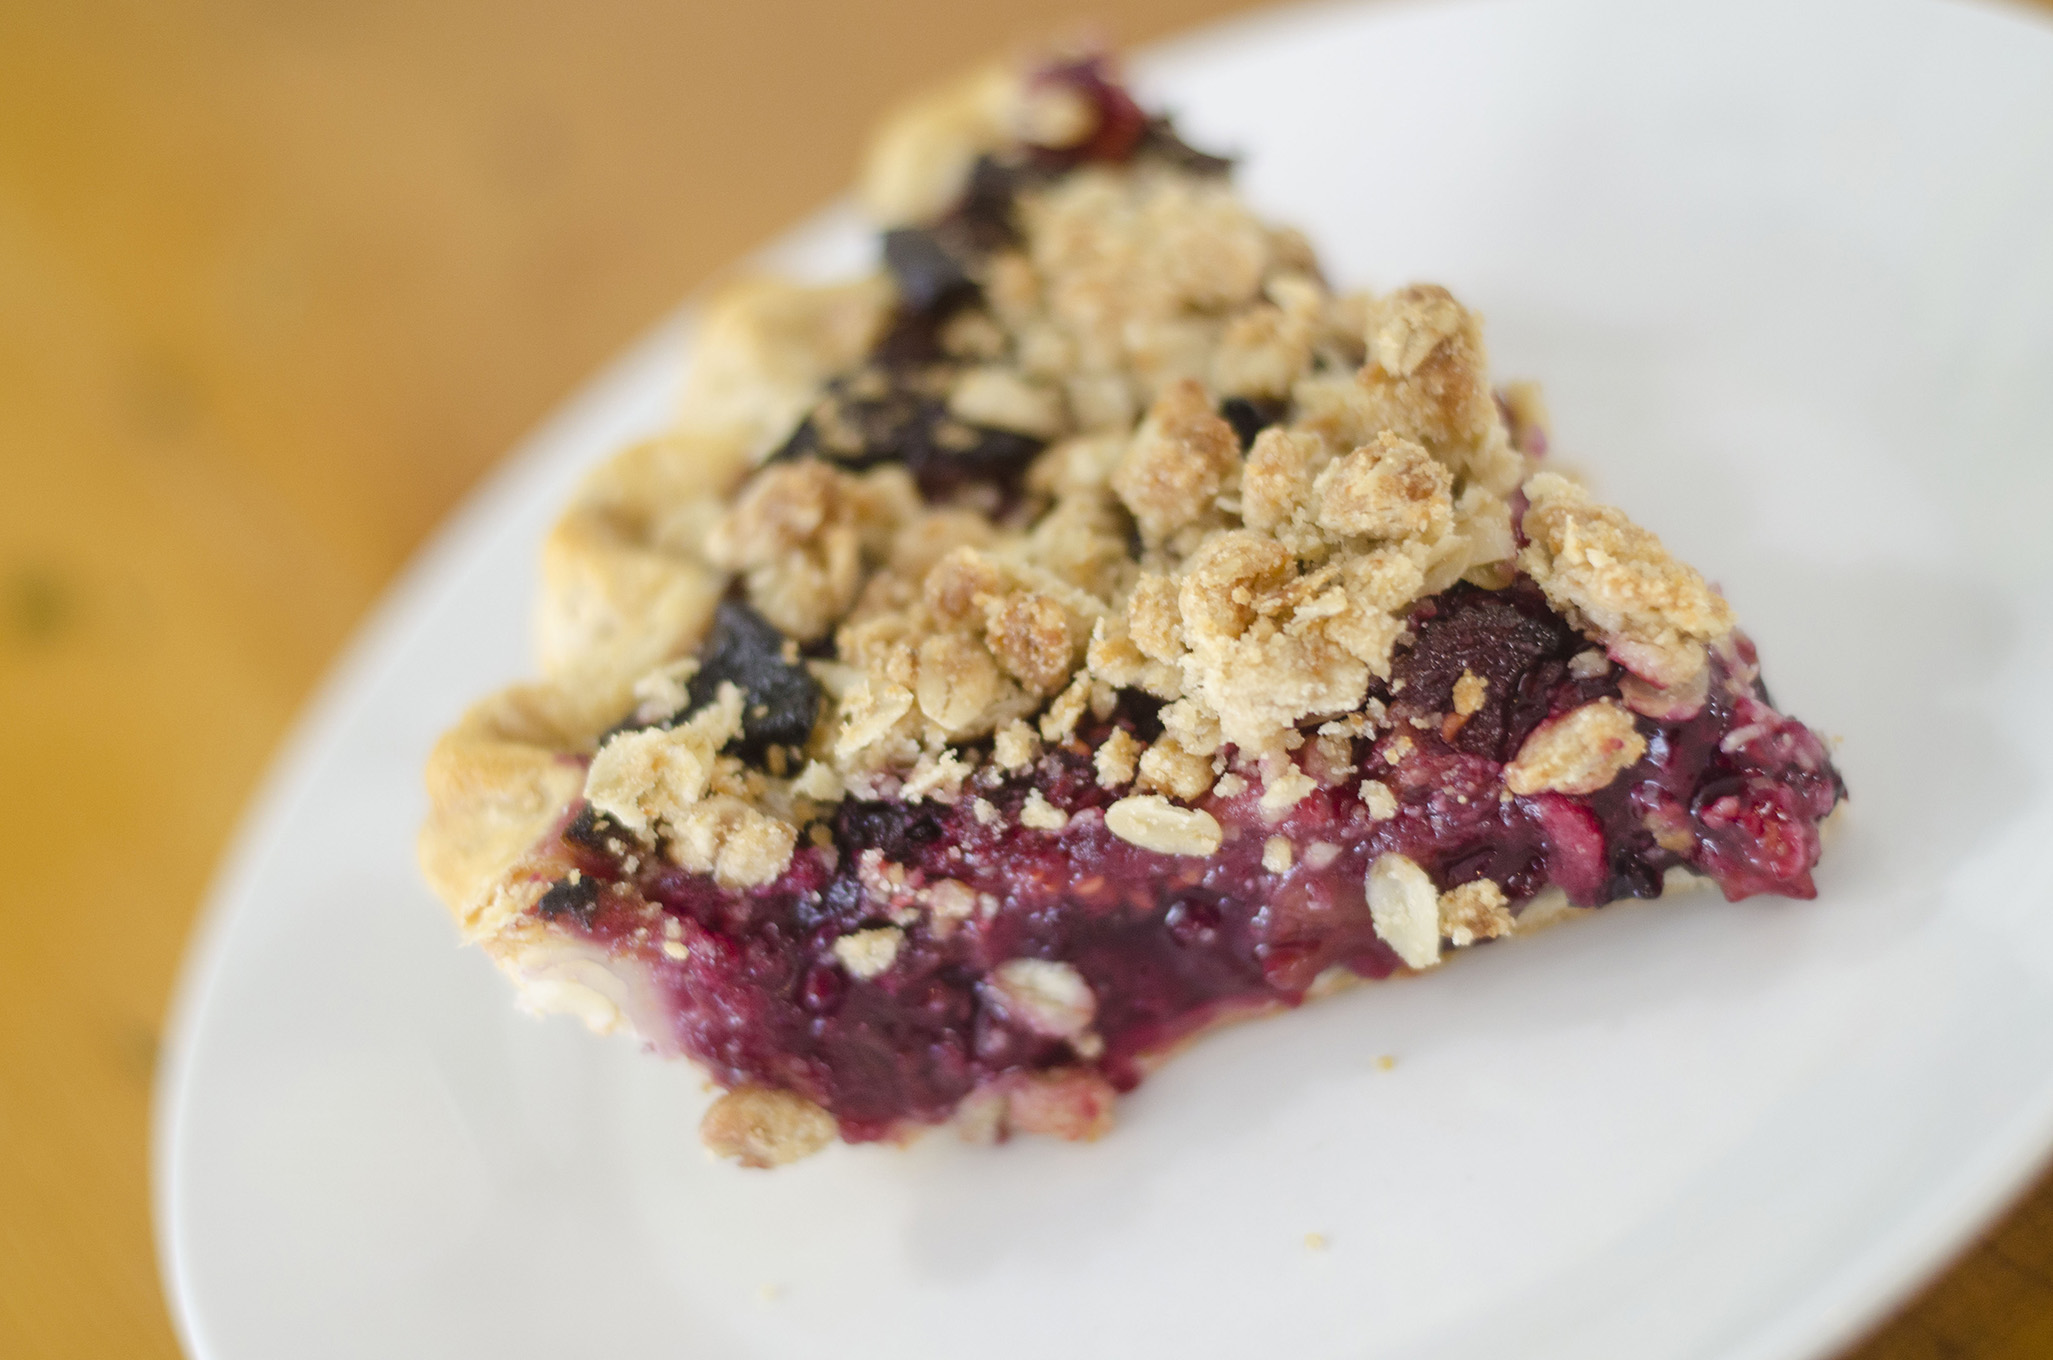 Bumbleberry Crumble from Riverside Pie Cafe in Windsor, Ontario.